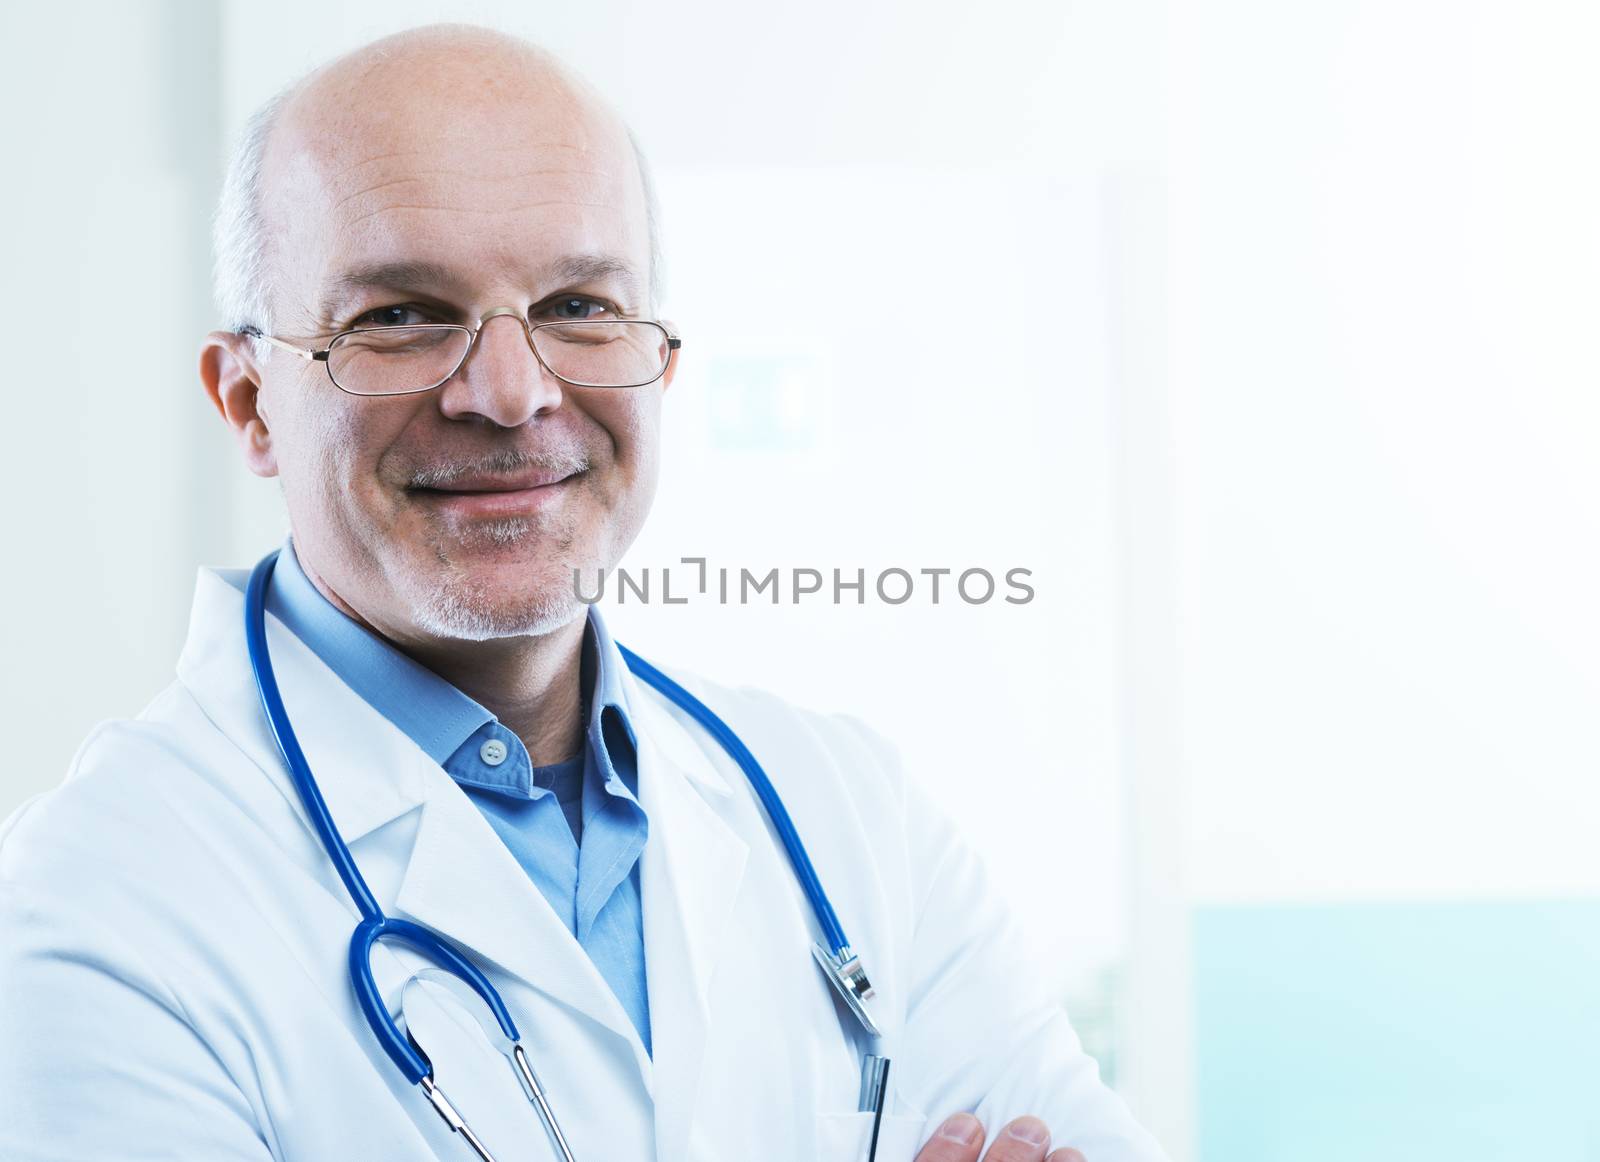 Friendly doctor smiling and looking at camera.